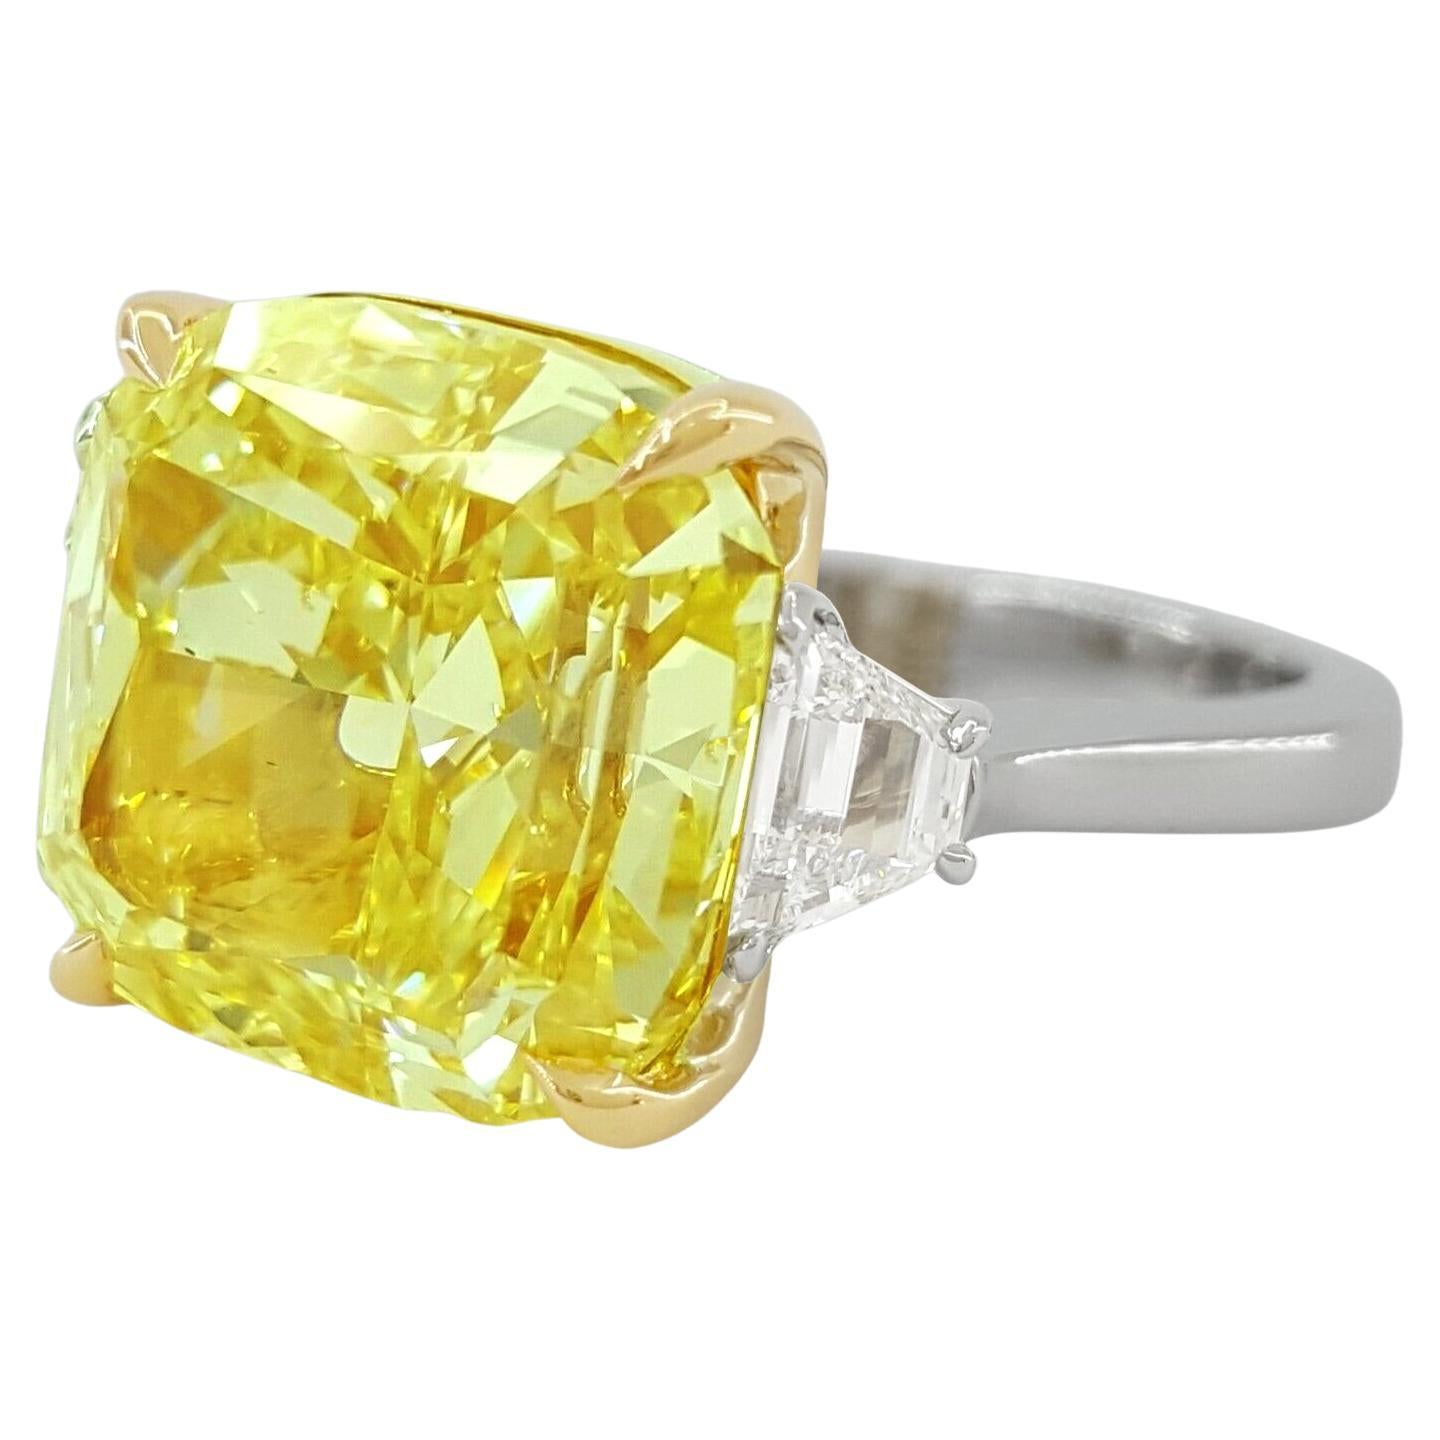 MADE IN ITALY GIA Certified 3 Carat Square Radiant Fancy Yellow Diamond Ring